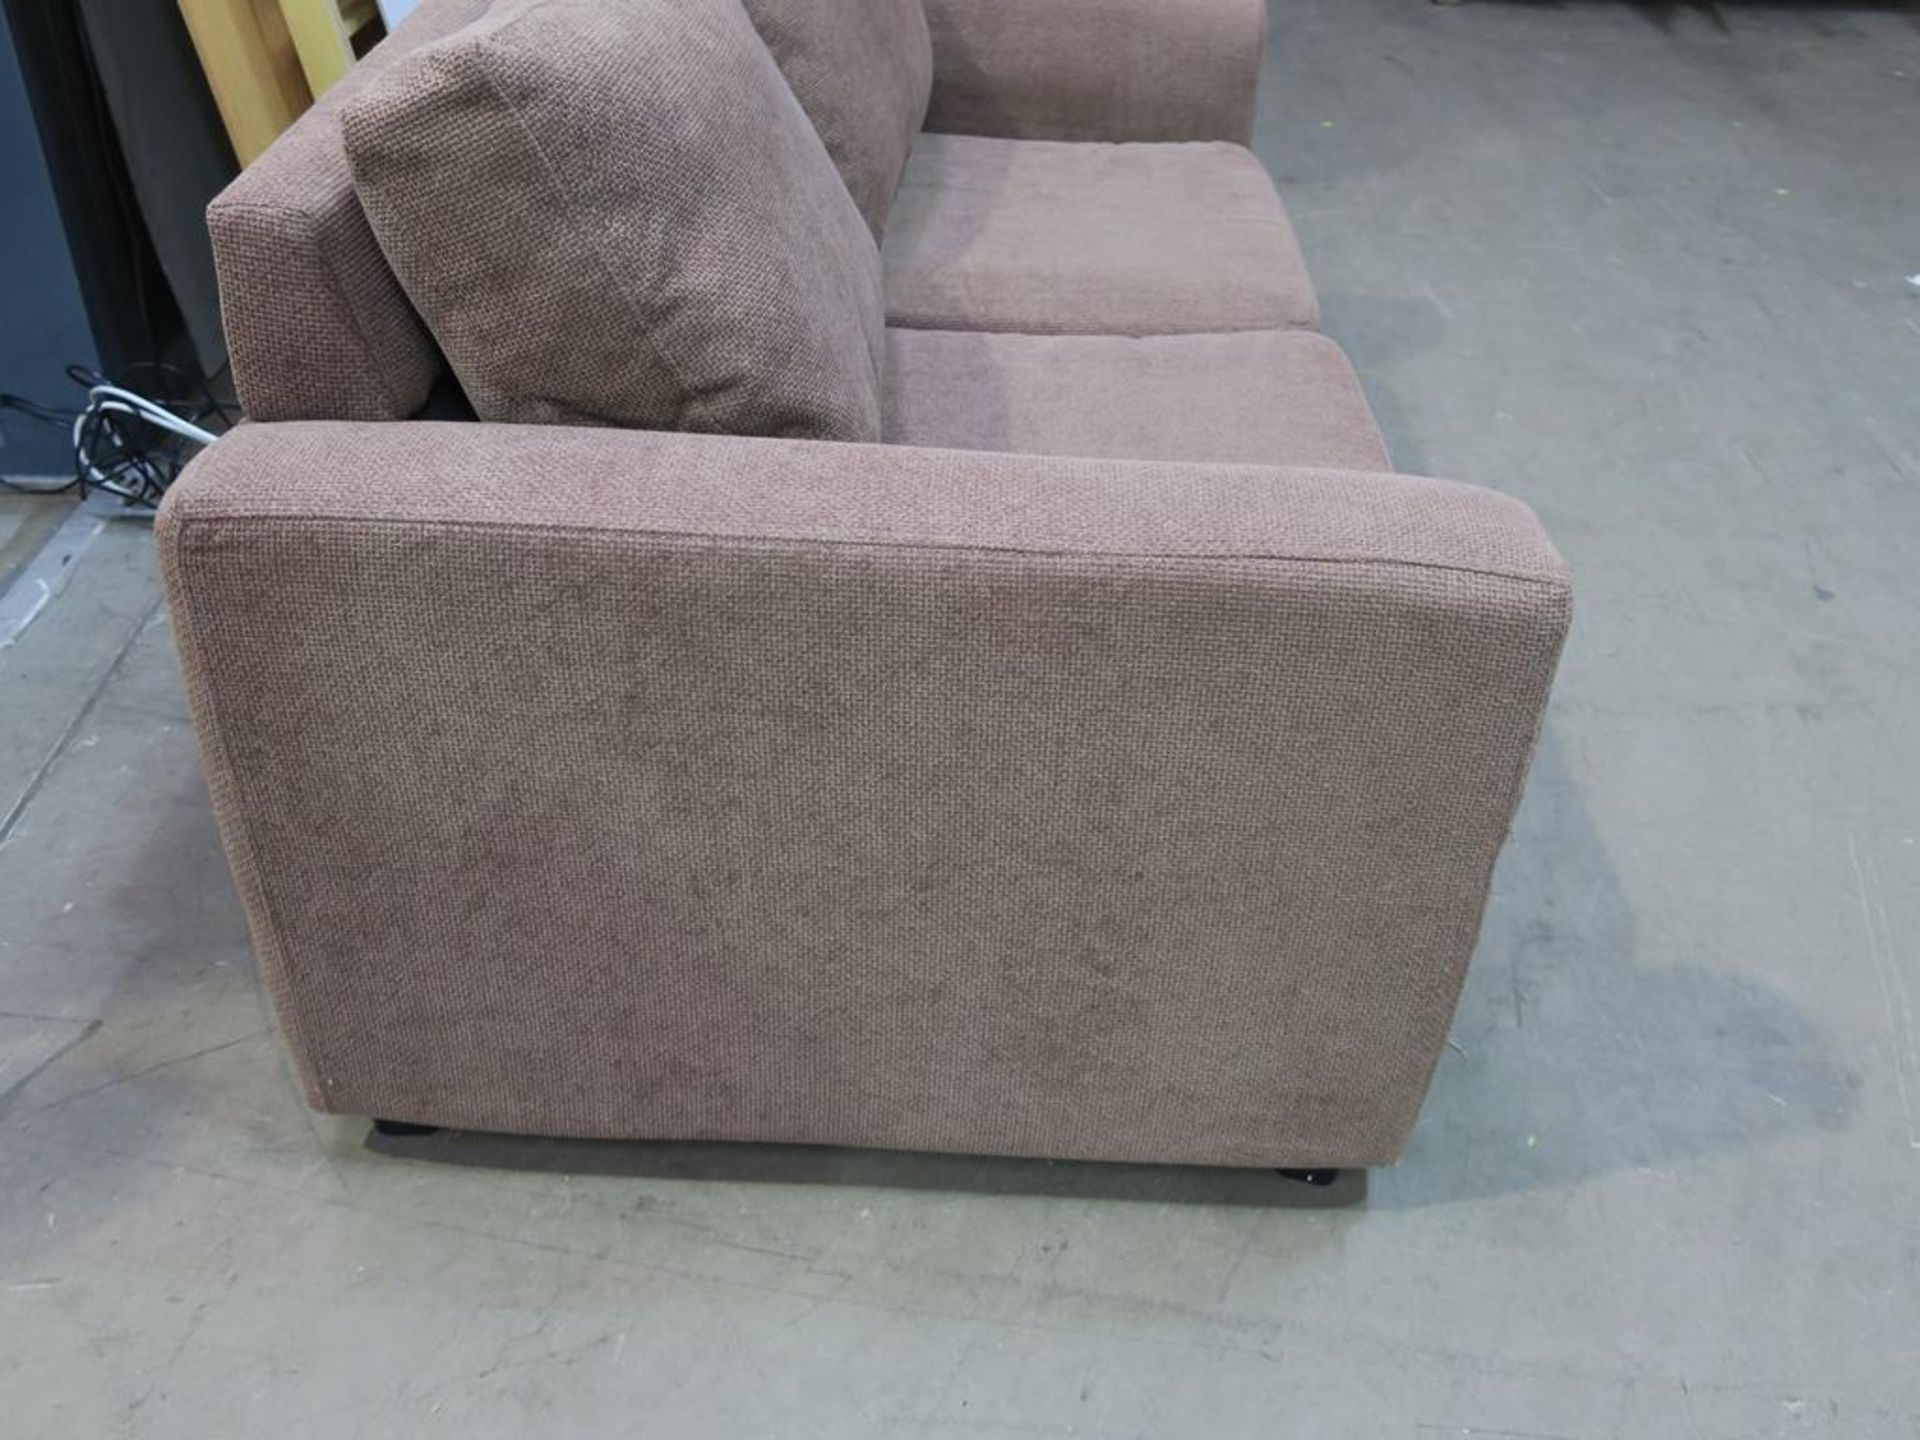 A two seater Bed Settee with a brown weave style upholstery (est £50-£100) - Image 9 of 10